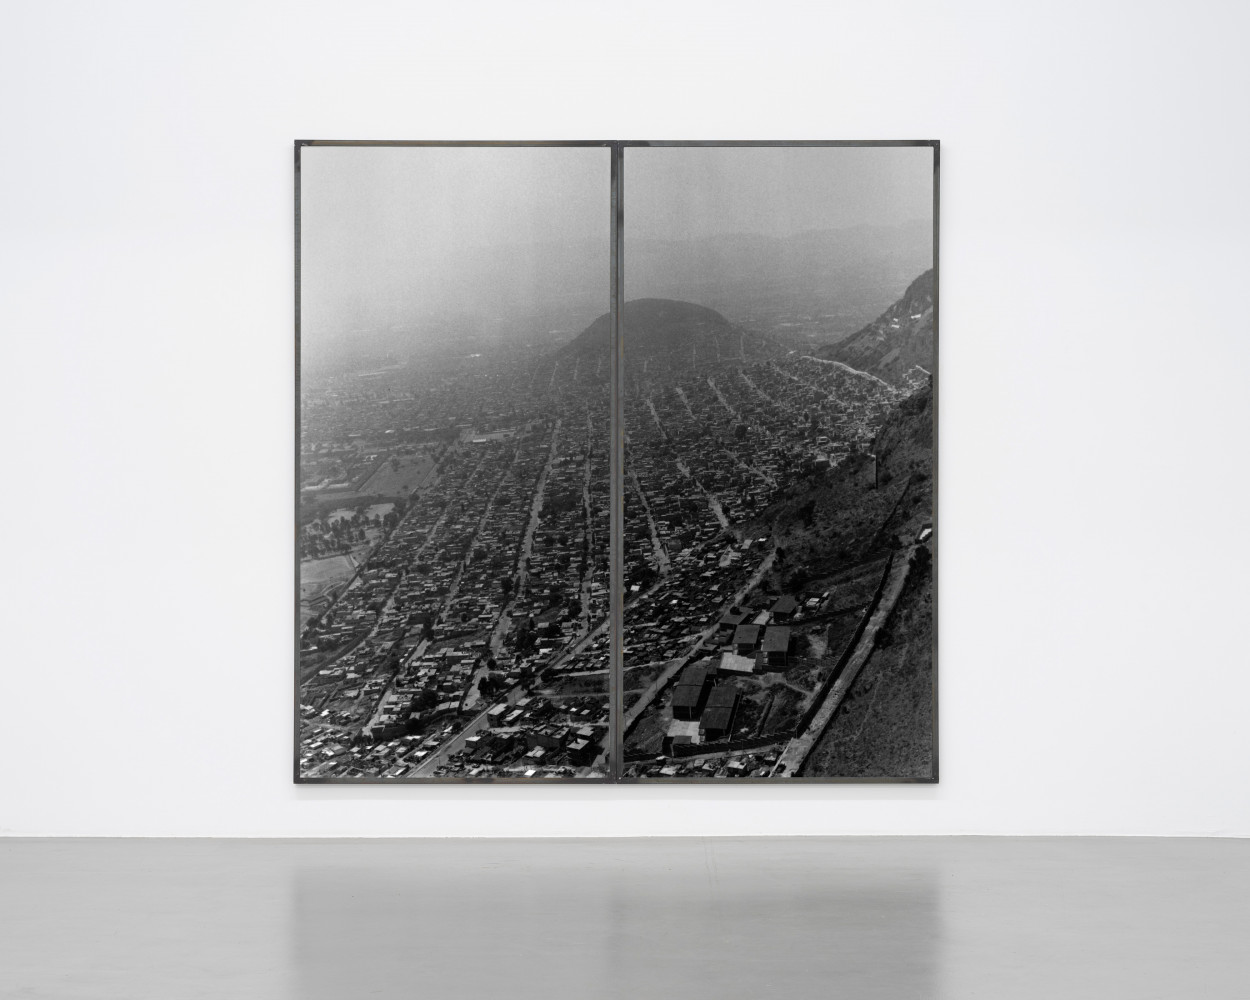 Balthasar Burkhard, ‘Mexico City’, 1998, silver gelatin on baryta paper/ vintage print by the artist, with artist steel frame